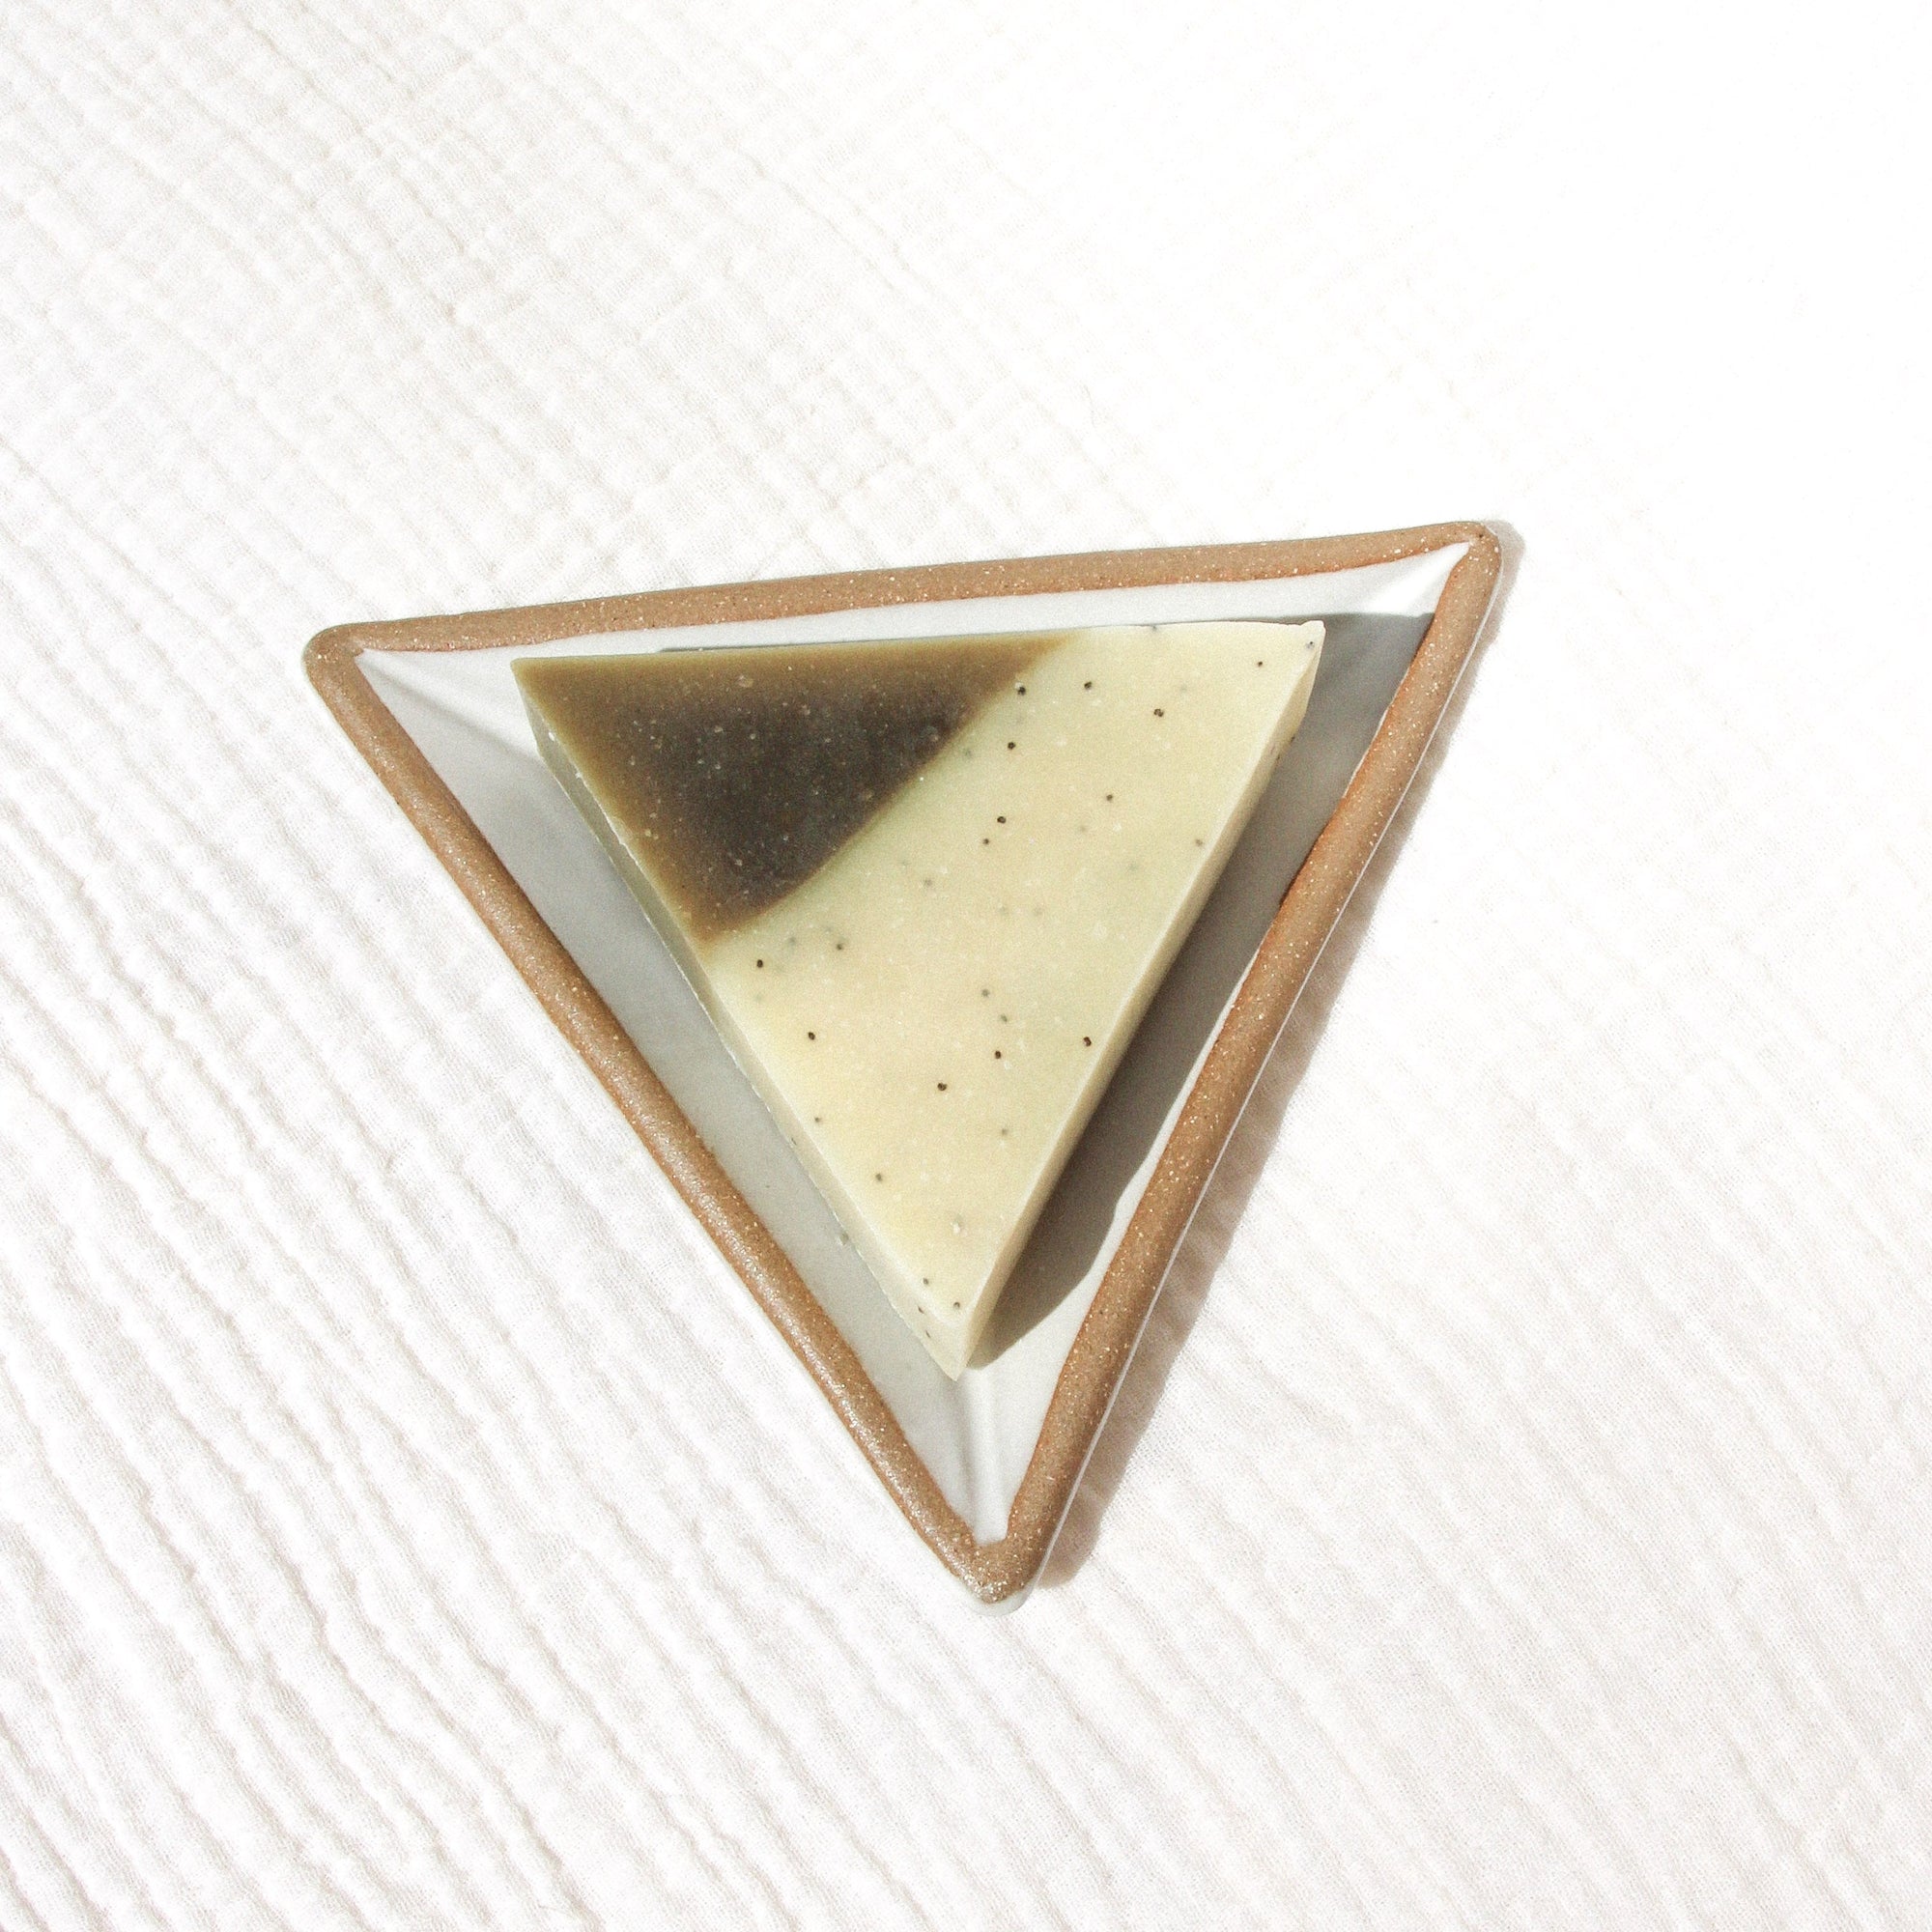 A triangle soap on a triangular soap dish against textured linen